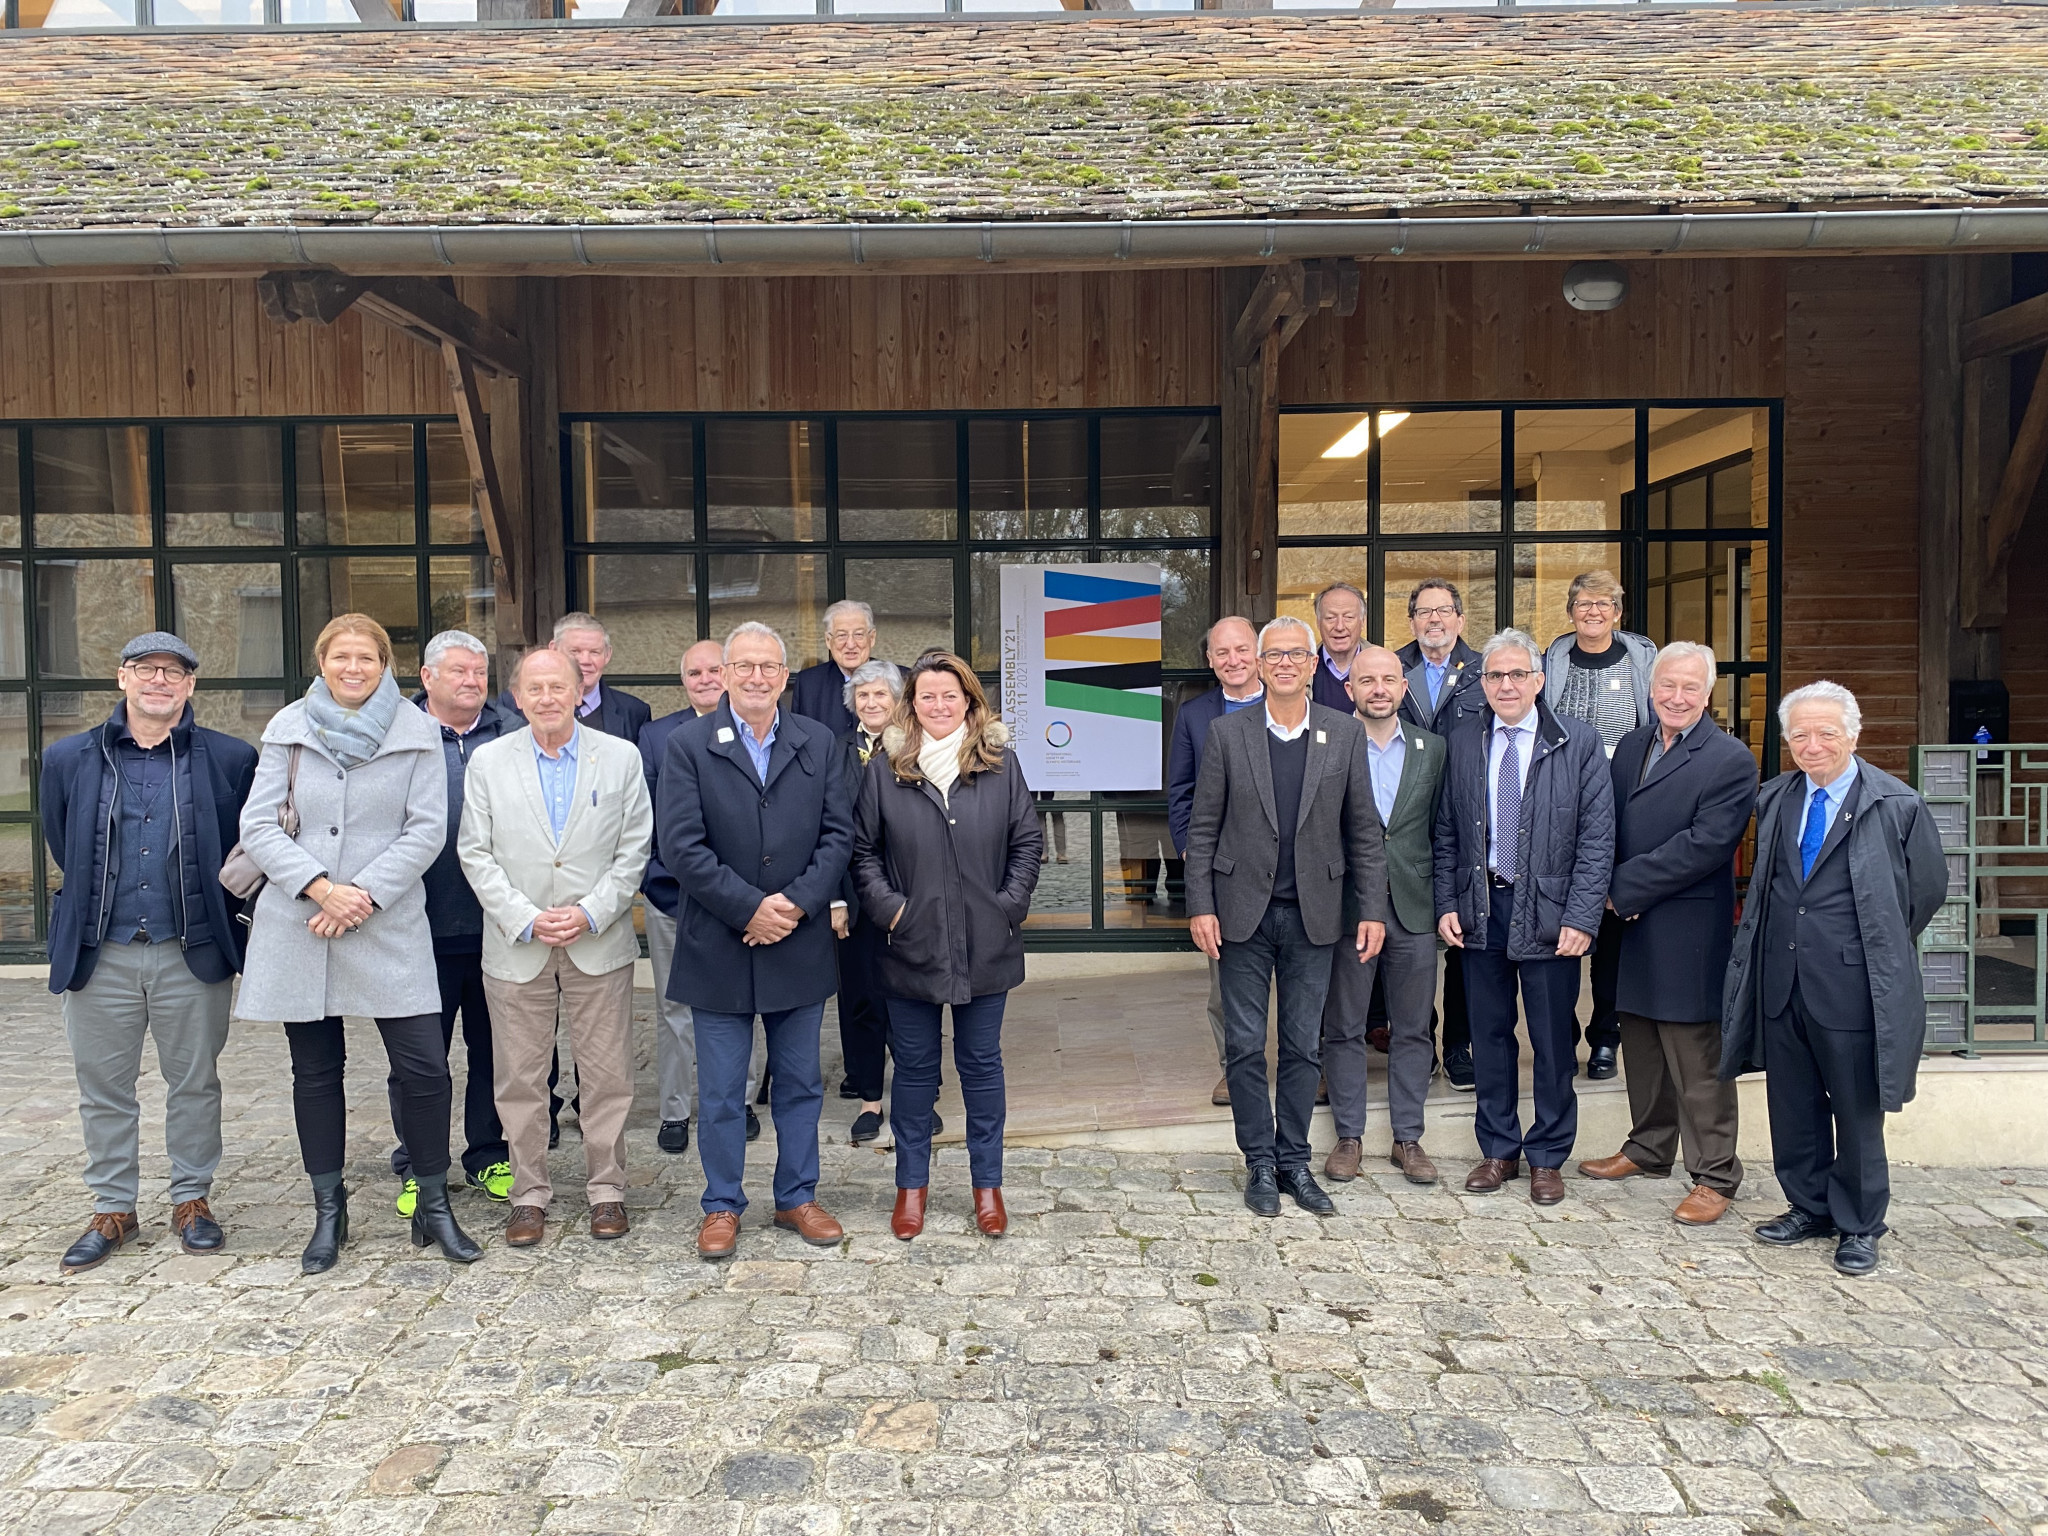 Olympic historians meet at home of Coubertin to celebrate 30th anniversary